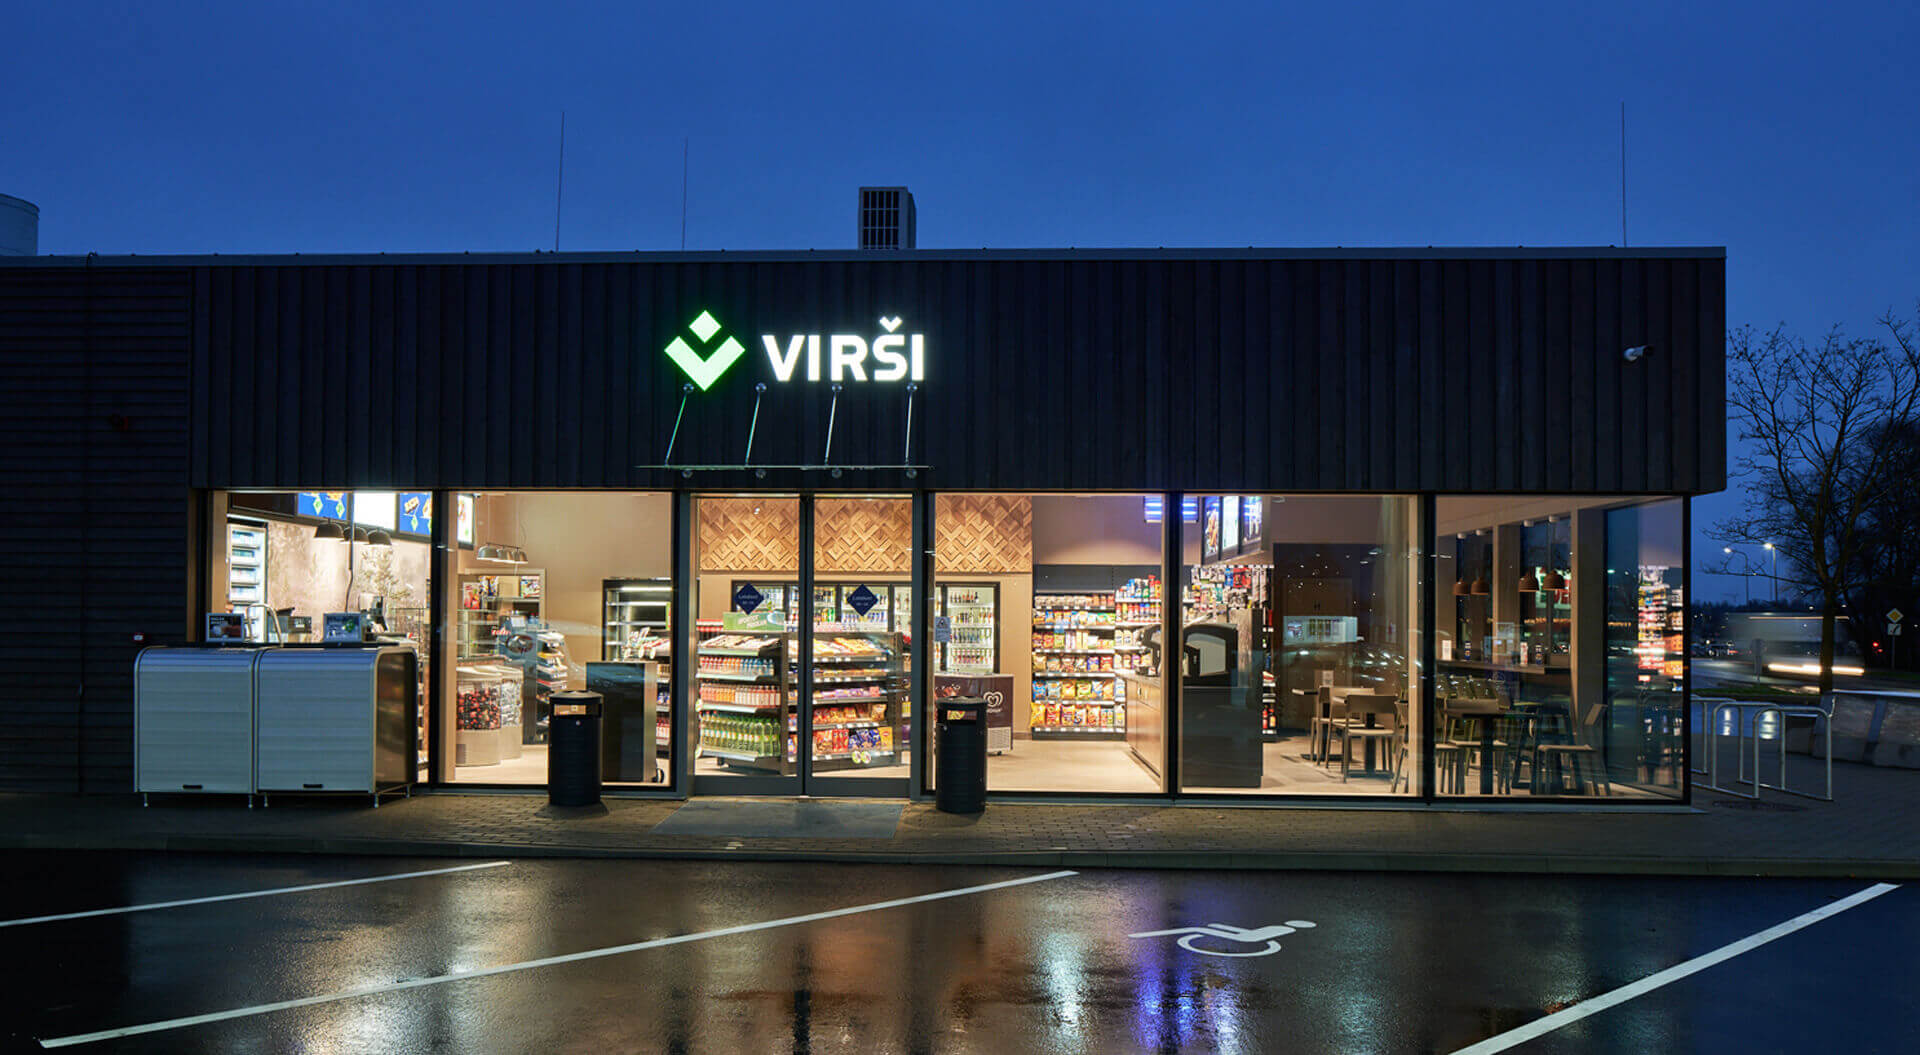 Trend Virsi CNG Gas Forecourt Benchmark Latvia, Creative Brand Convenience Store Interior Design, Graphic Communications - CampbellRigg Agency